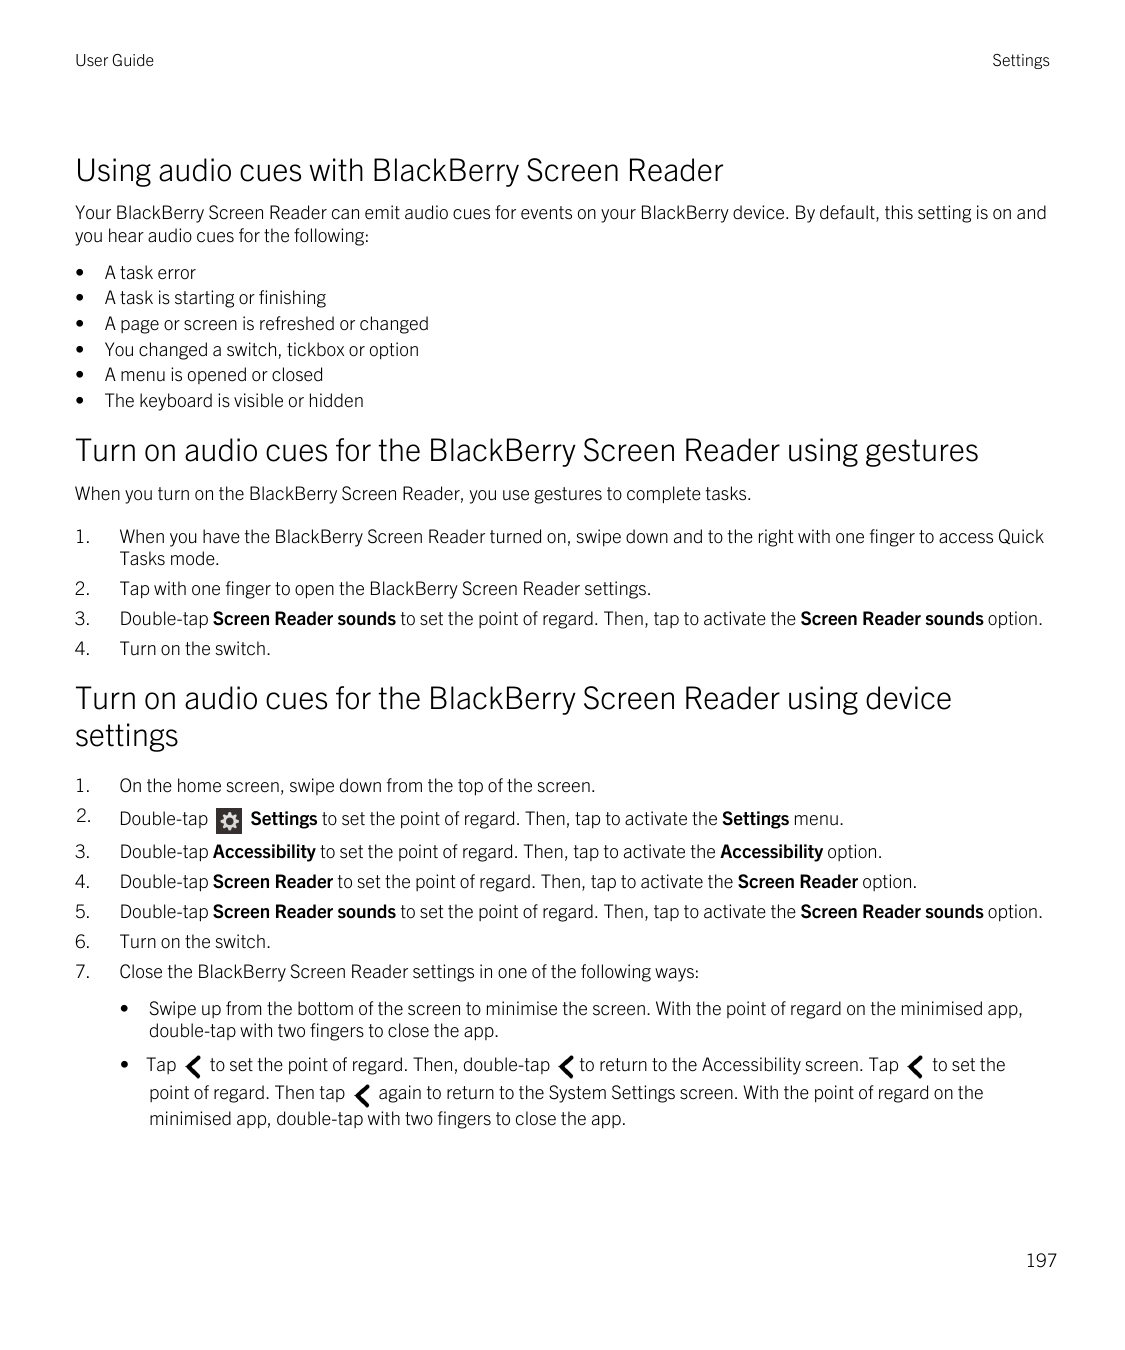 User GuideSettingsUsing audio cues with BlackBerry Screen ReaderYour BlackBerry Screen Reader can emit audio cues for events on 